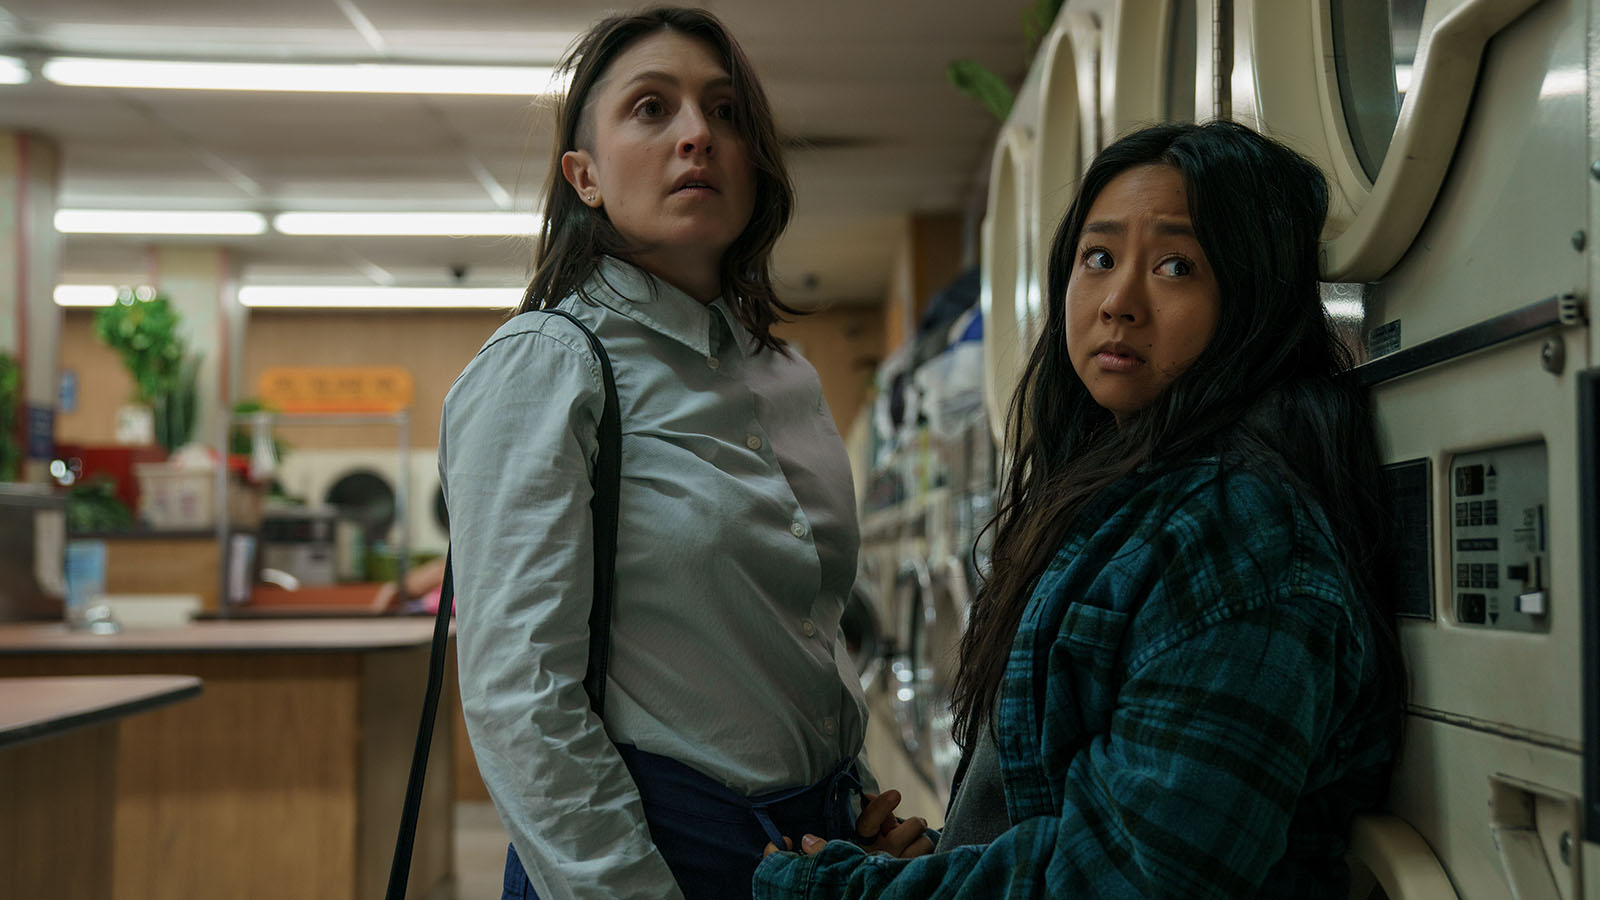 (L) Joy, played by Stephanie Hsu, with girlfriend Becky, played by Tallie Medel. Image © A24